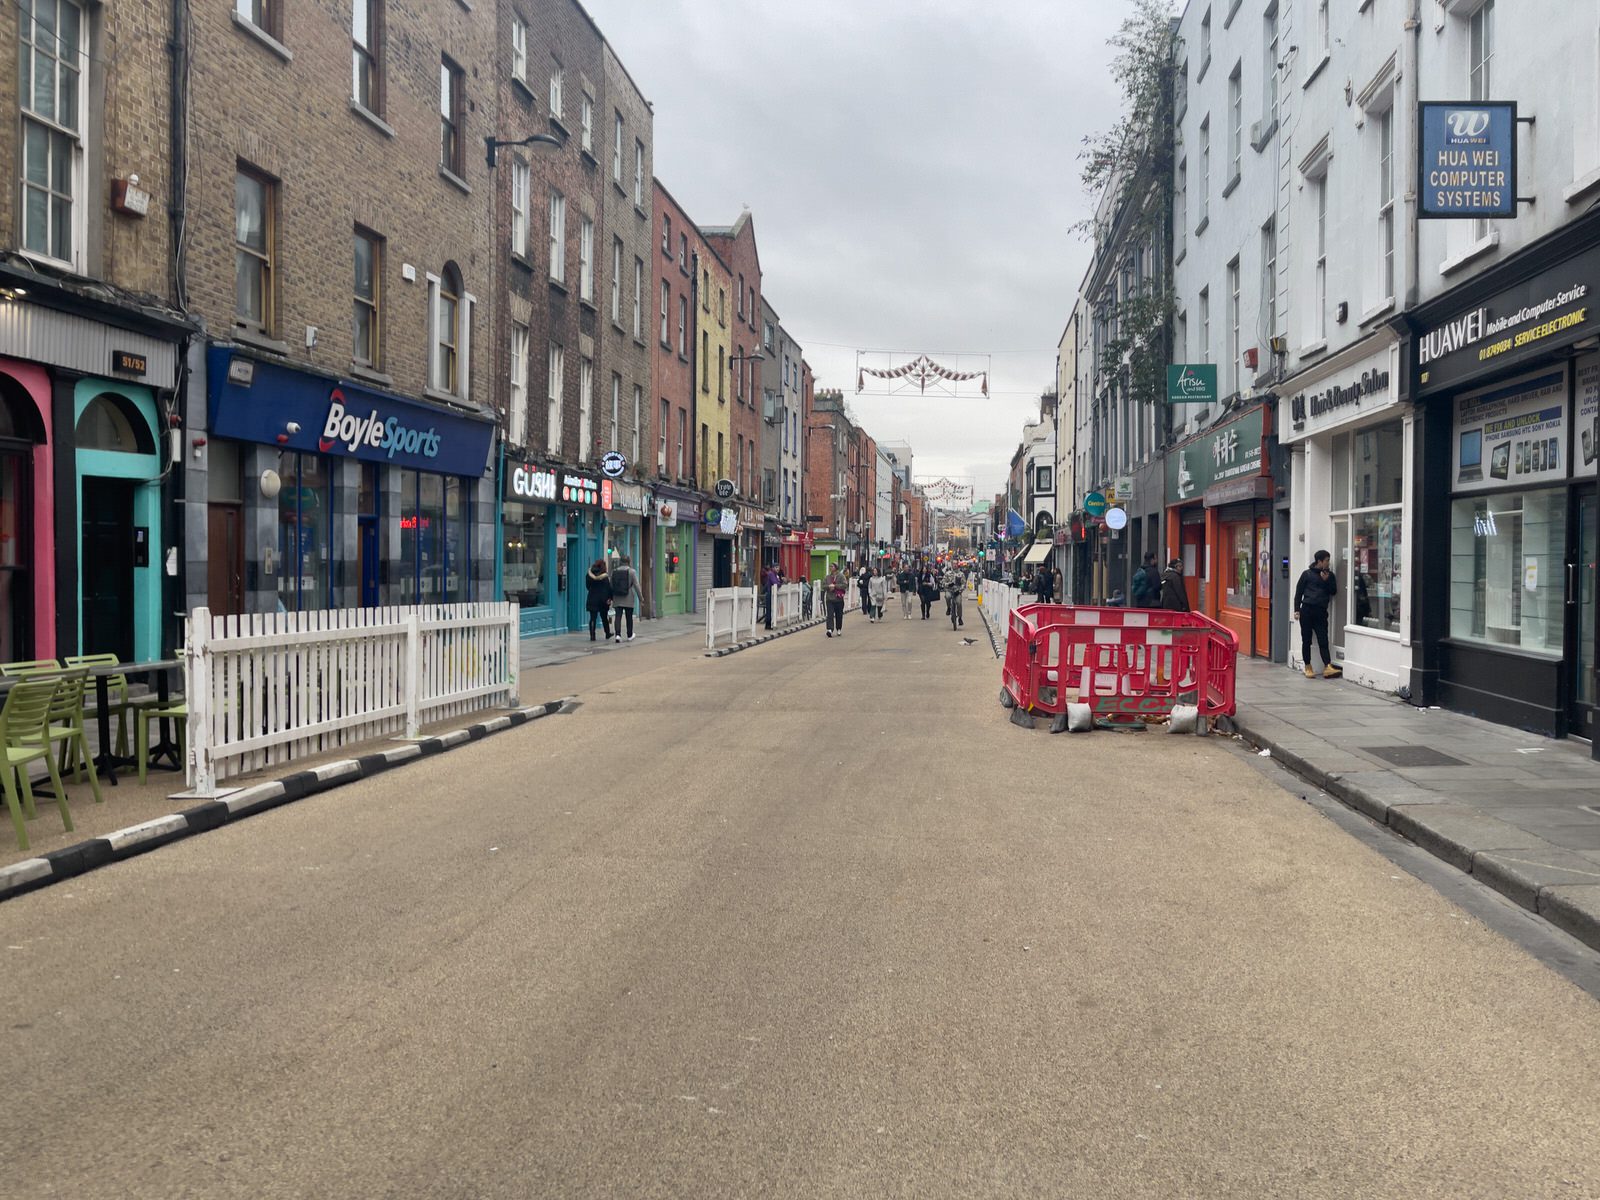 THE NEW STREET FURNITURE IS BEING INSTALLED ON CAPEL STREET [BUT THERE ARE FEW VISITORS TO BE SEEN TODAY]-225424-1